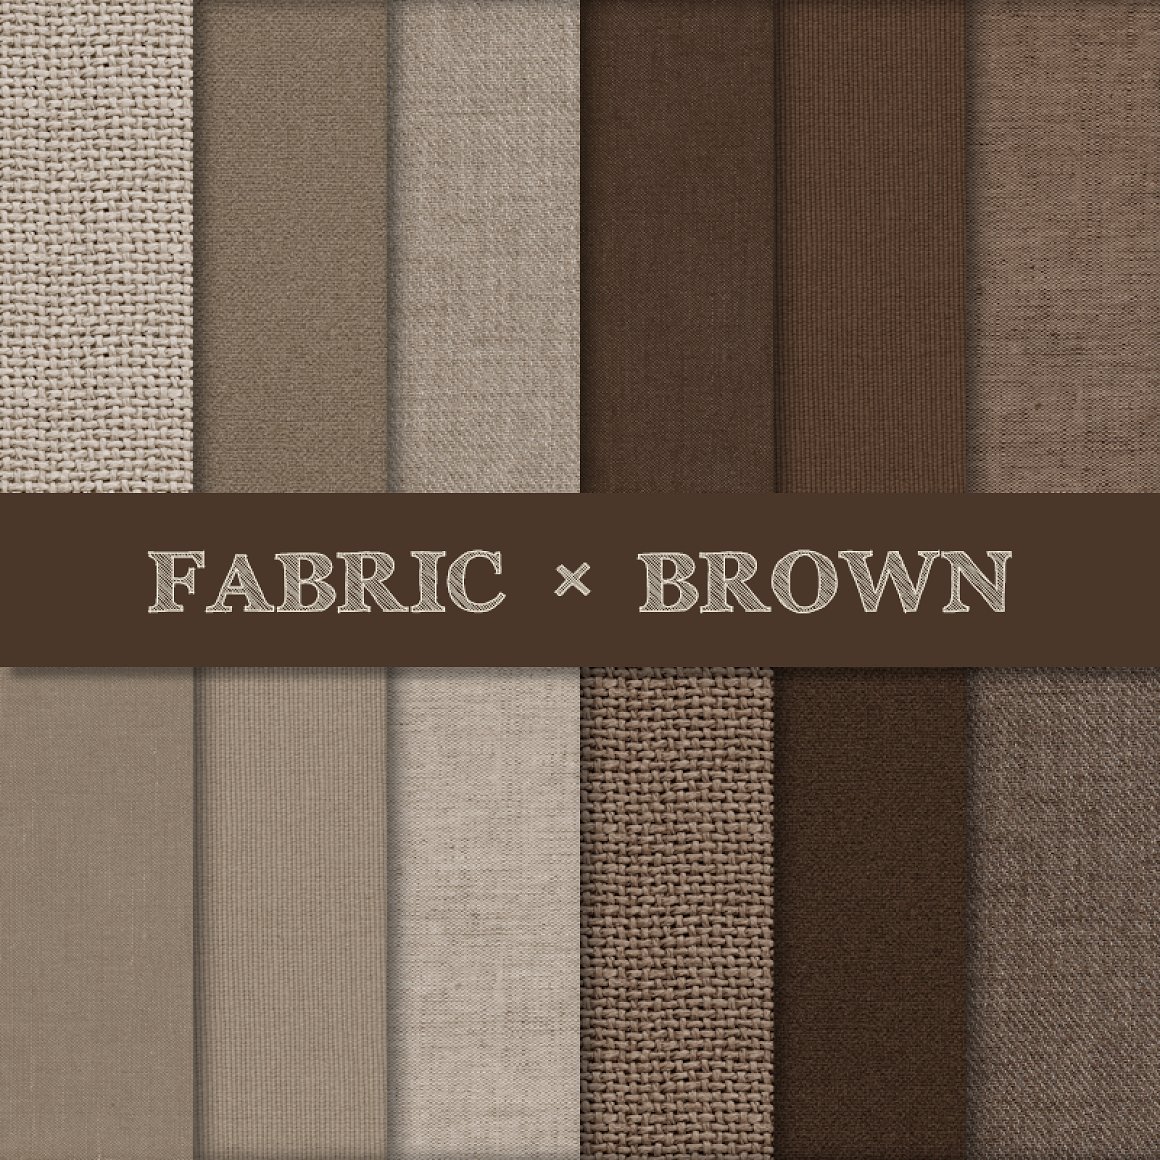 Diverse of brown fabric textures.